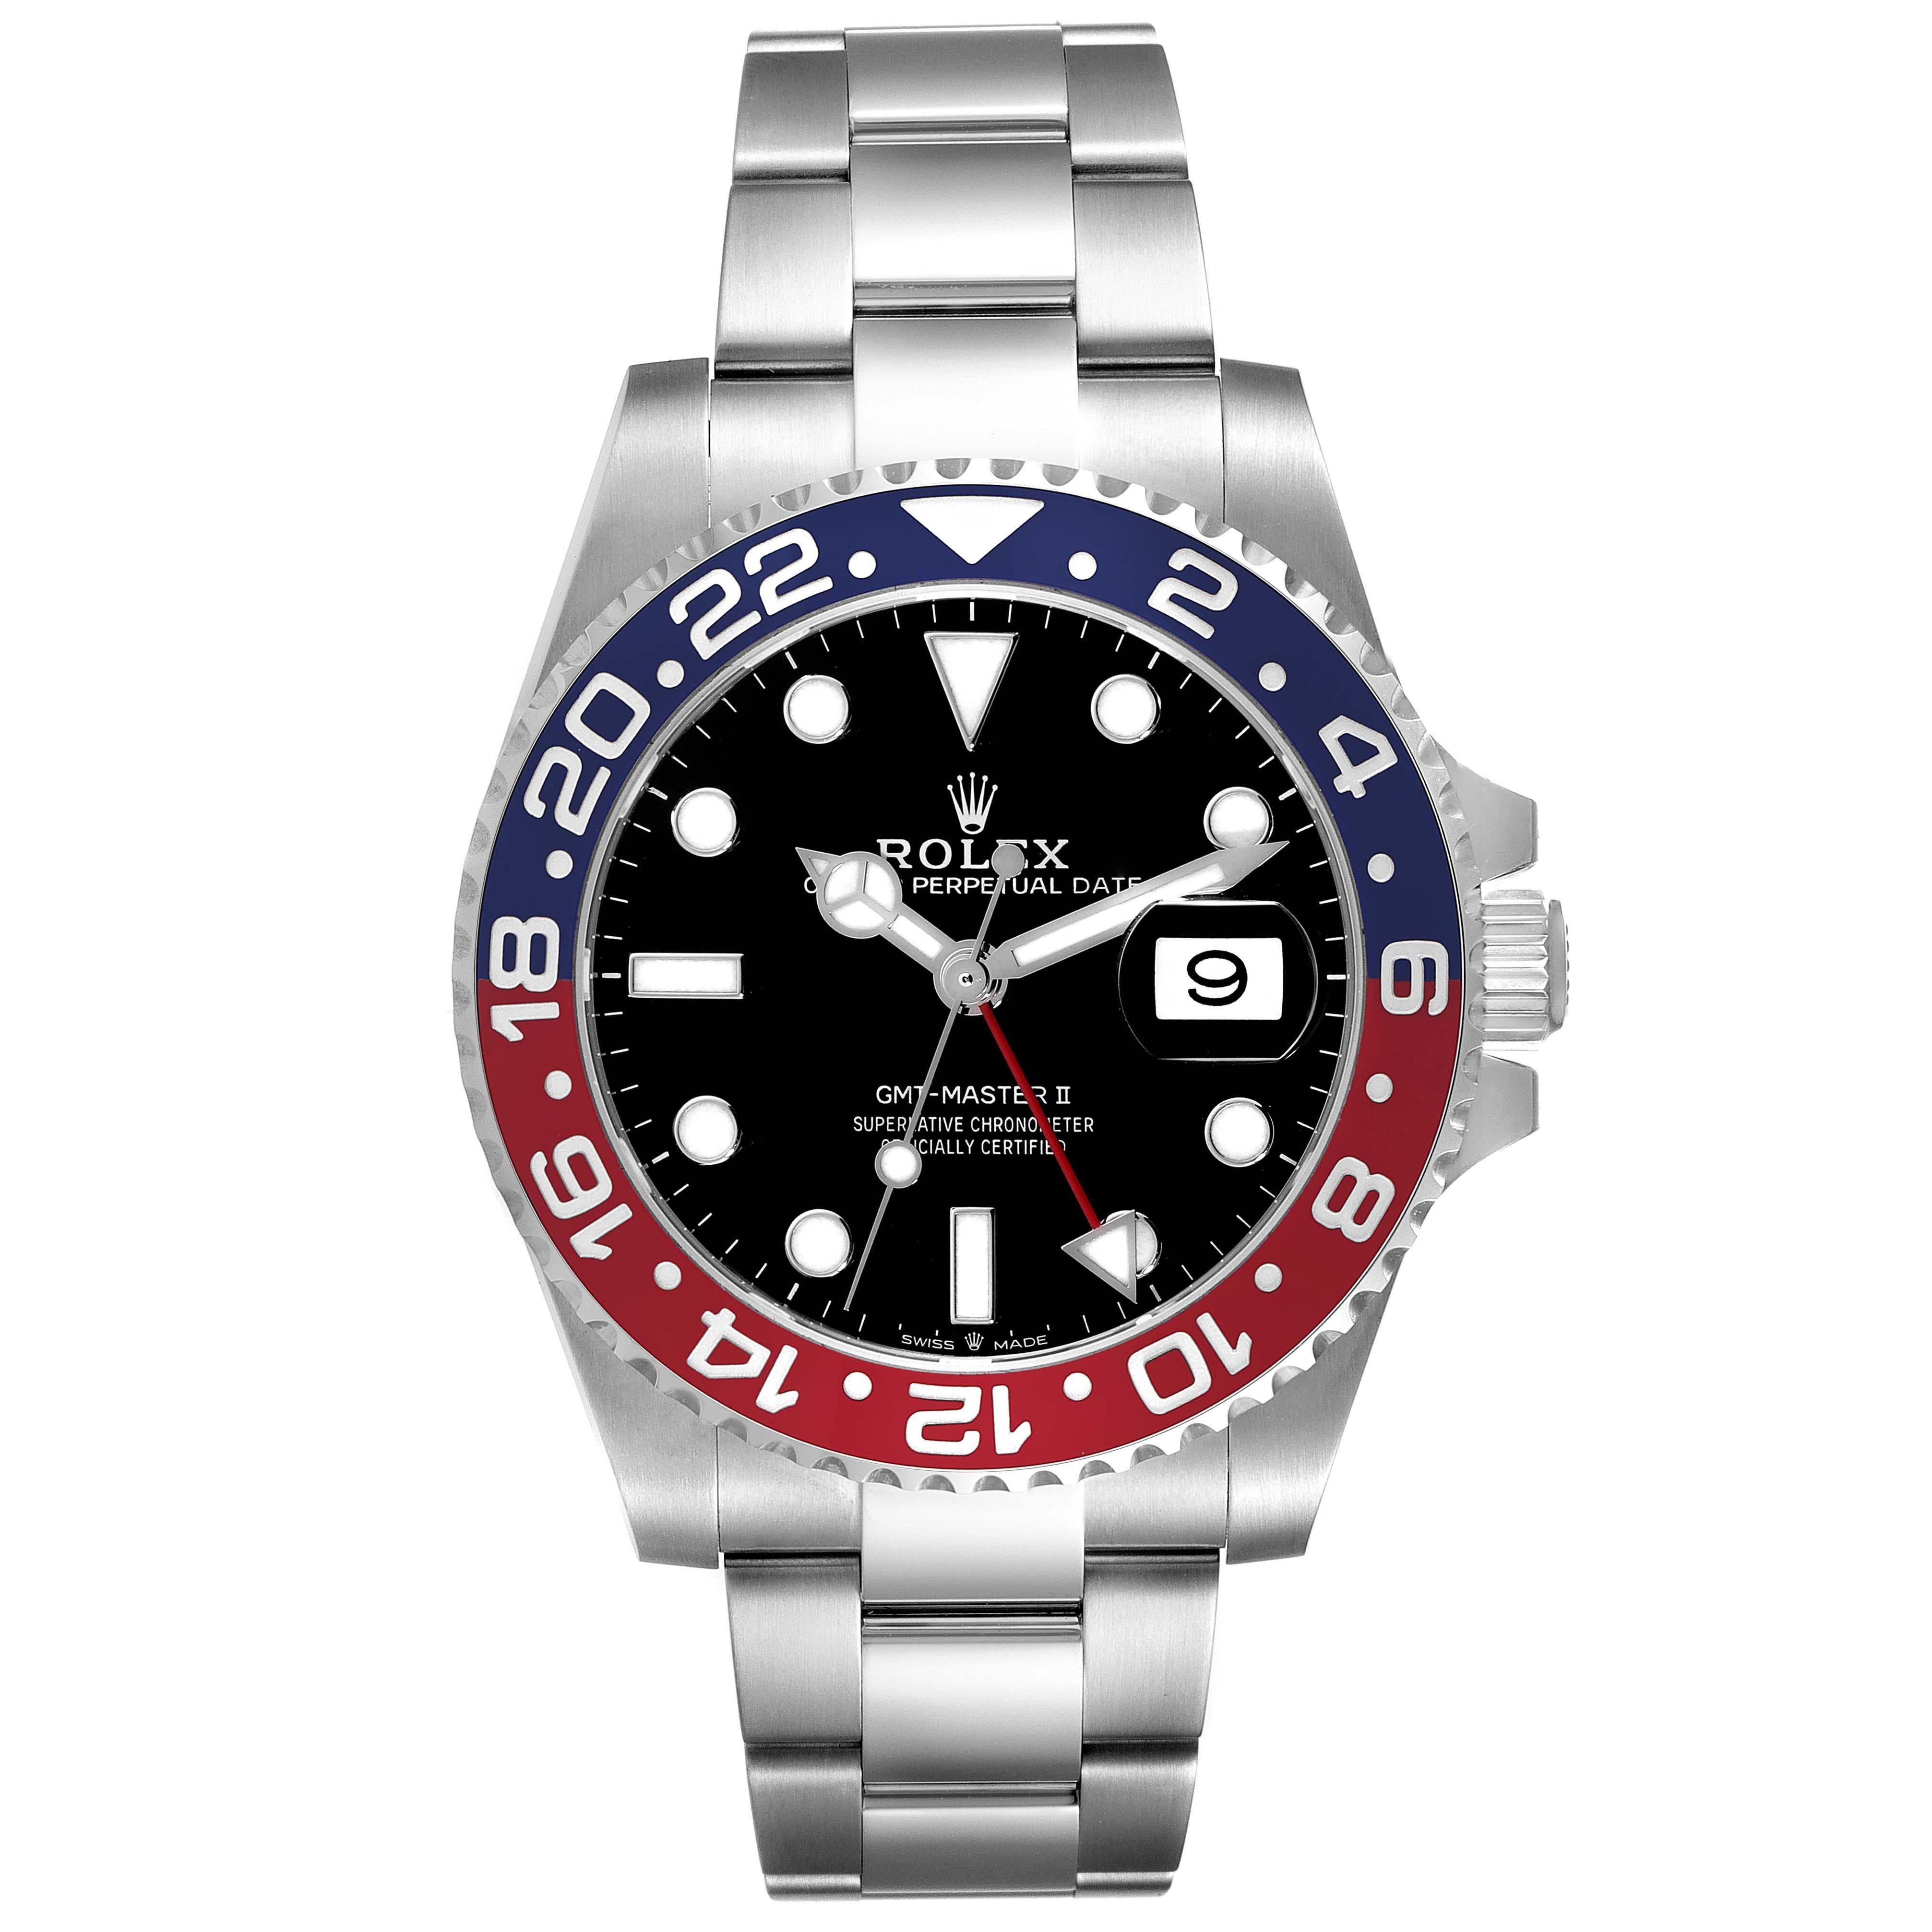 Rolex GMT Master II Pepsi Bezel Oyster Bracelet Steel Mens Watch 126710 Box Card. Officially certified chronometer automatic self-winding movement. Stainless steel case 40 mm in diameter. Rolex logo on the crown. Stainless steel bidirectional